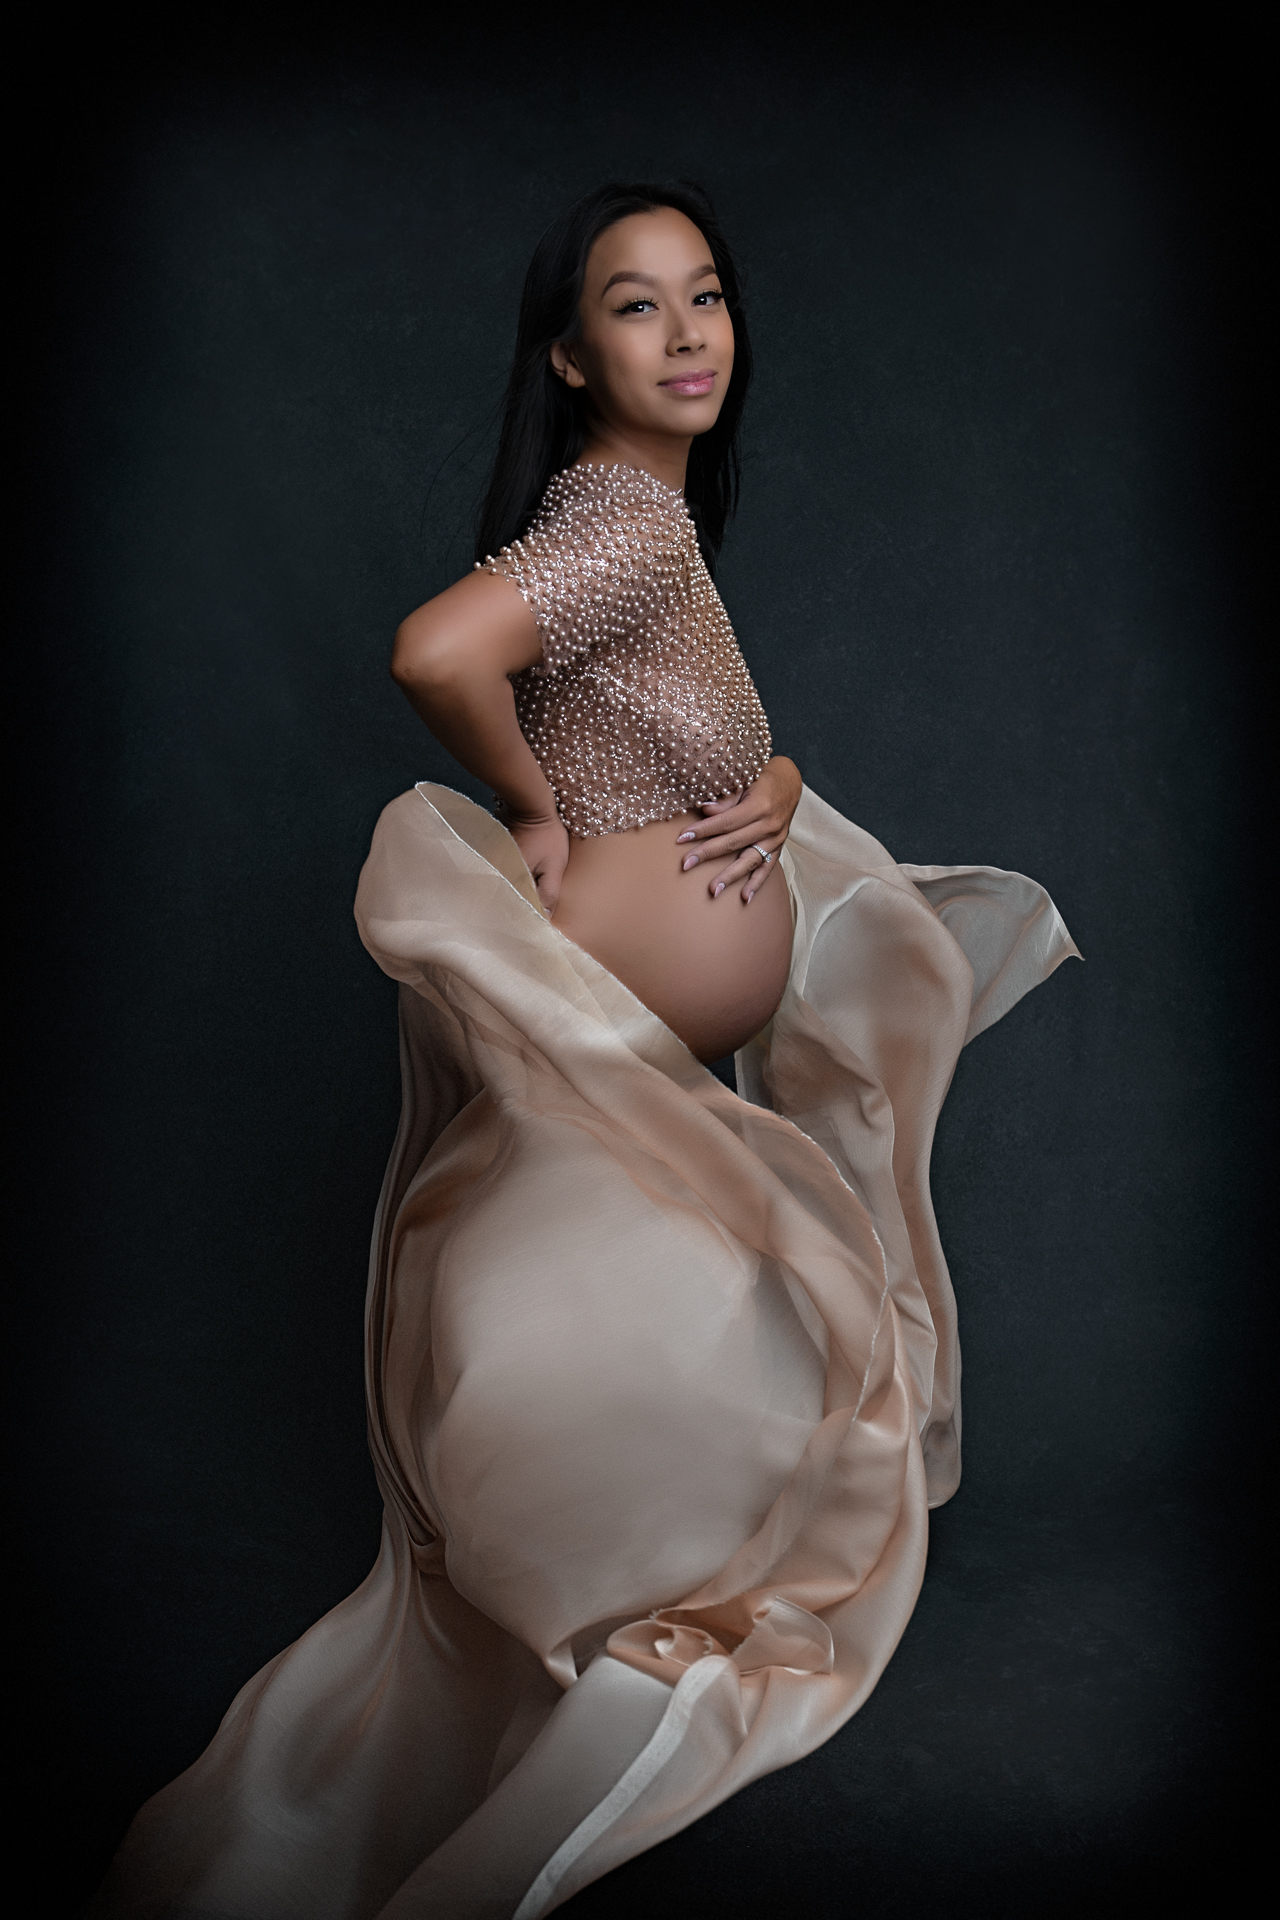 Pregnant woman wears pearl top and light brown fabric on dark backdrop